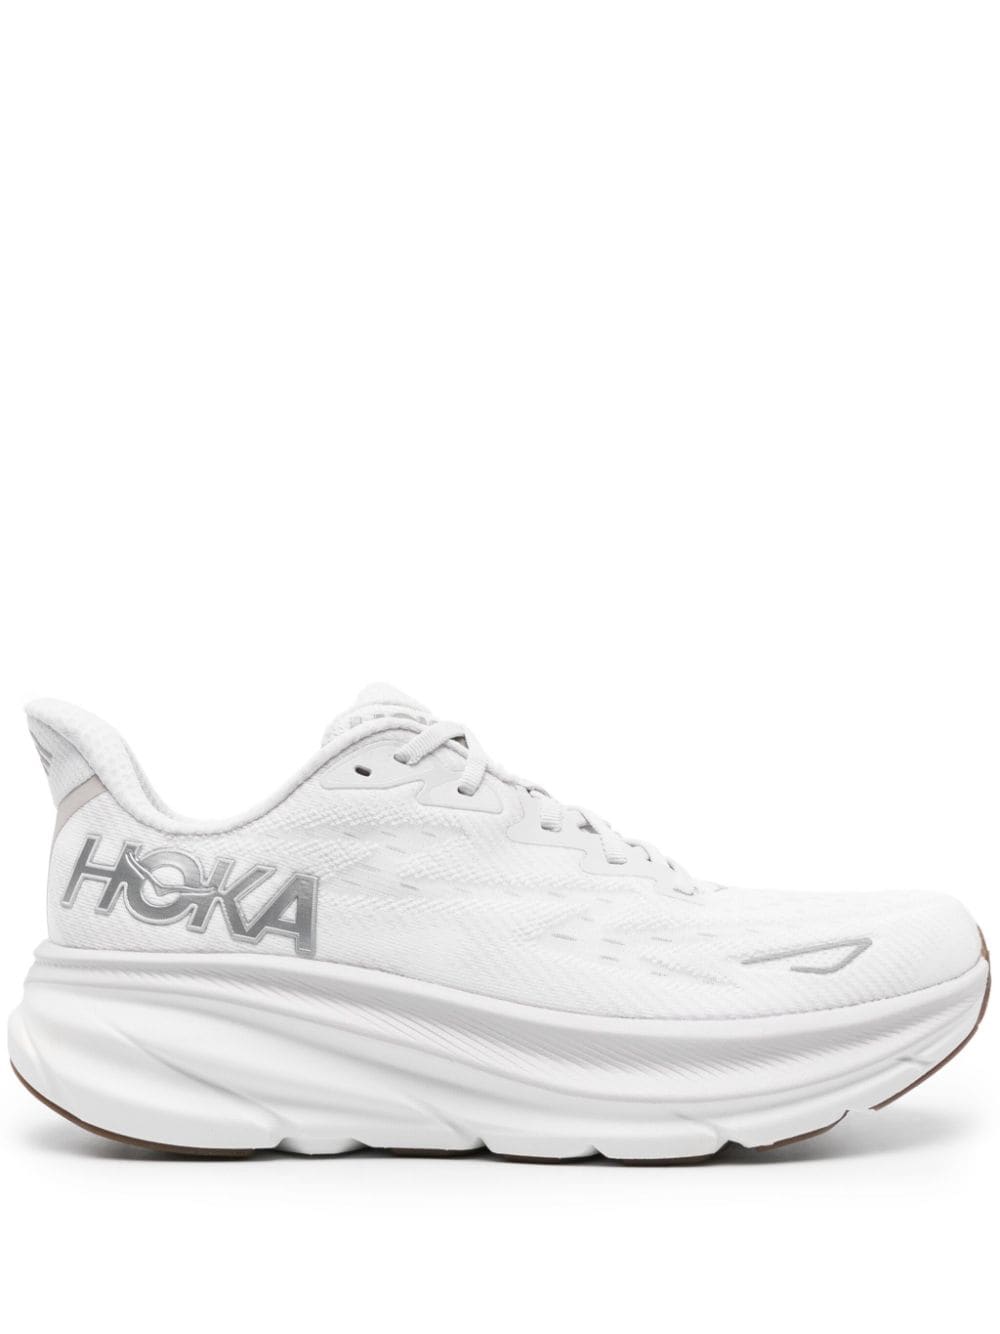 Hoka Clifton 9 Lace-up Sneakers In White